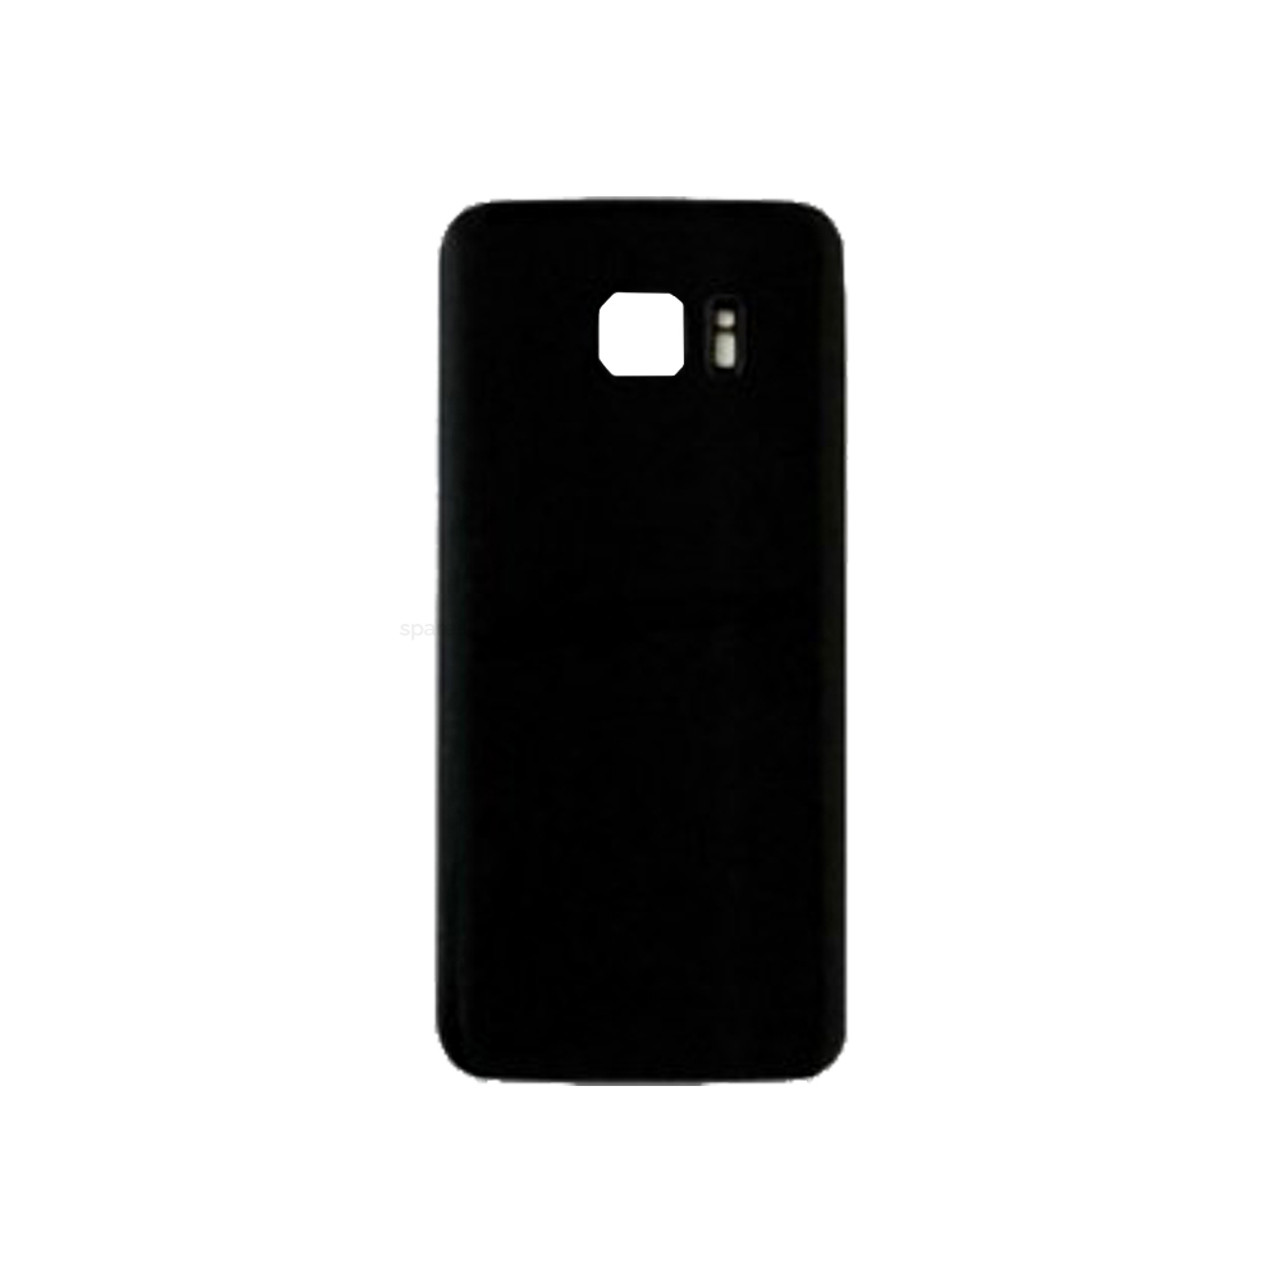 Galaxy S7 Edge - Replacement Back Glass - Black - SM-G970